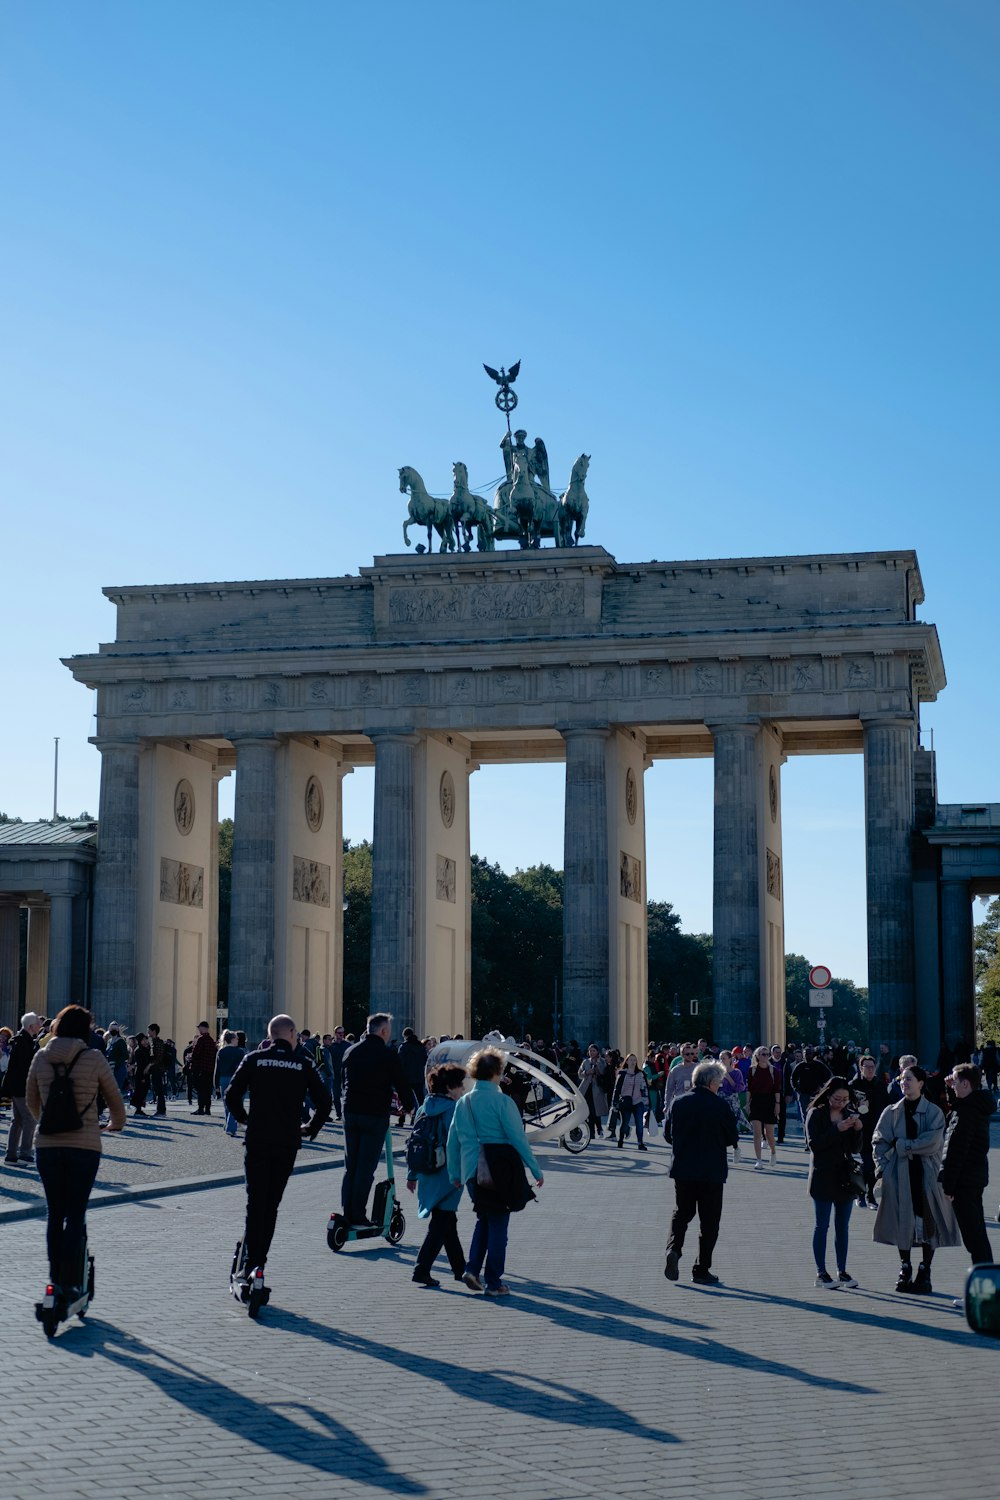 a large group of people walking in front of Brandenburg Gate with columns and a statue on top